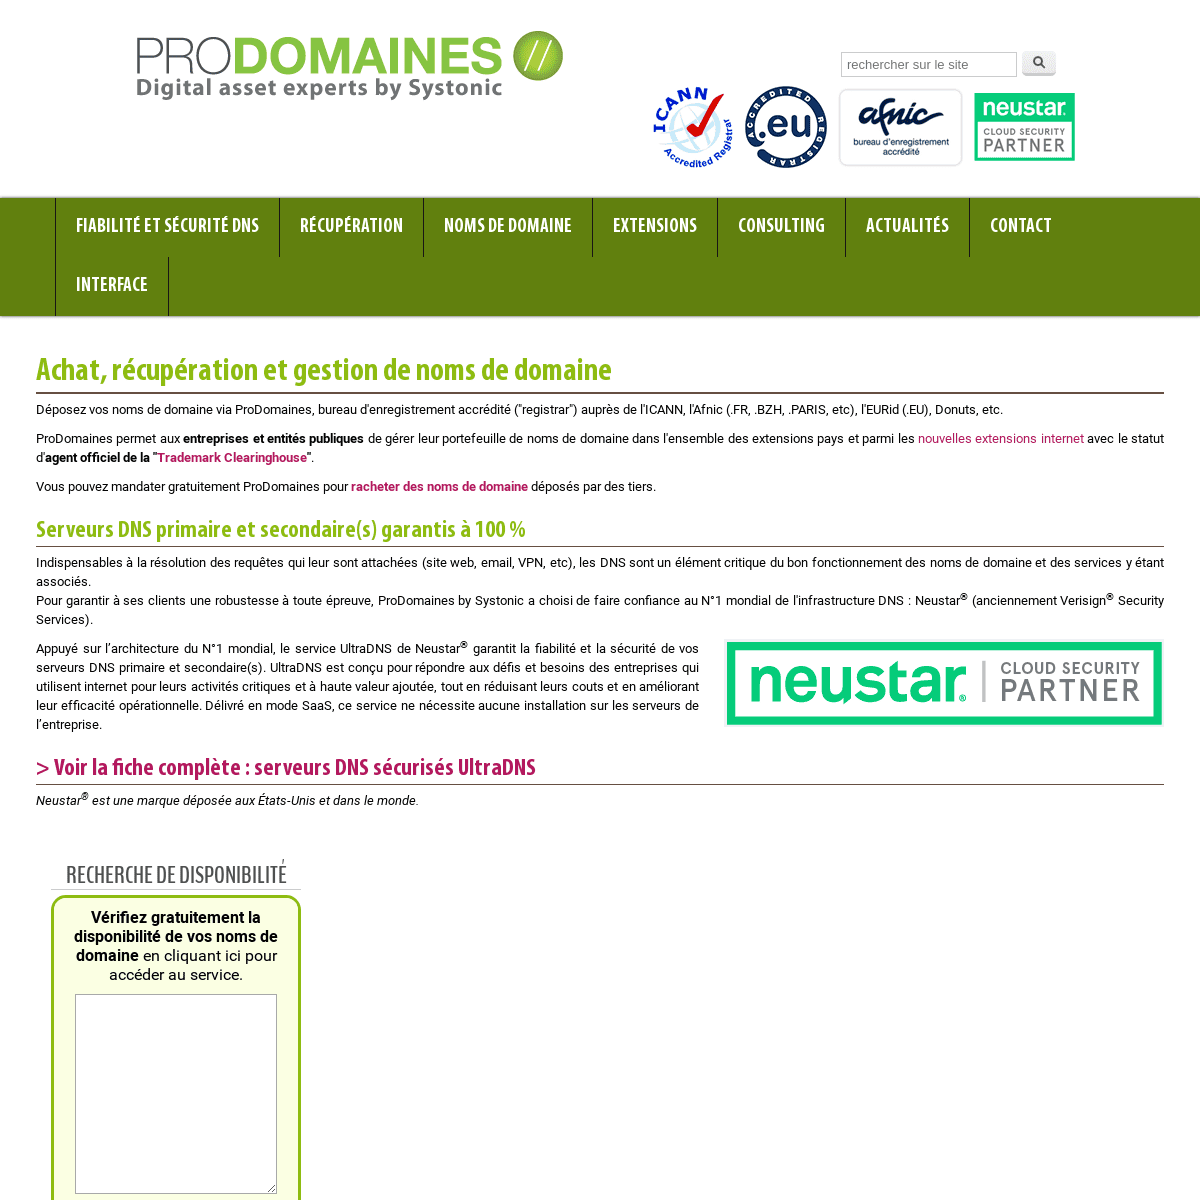 A complete backup of https://prodomaines.com